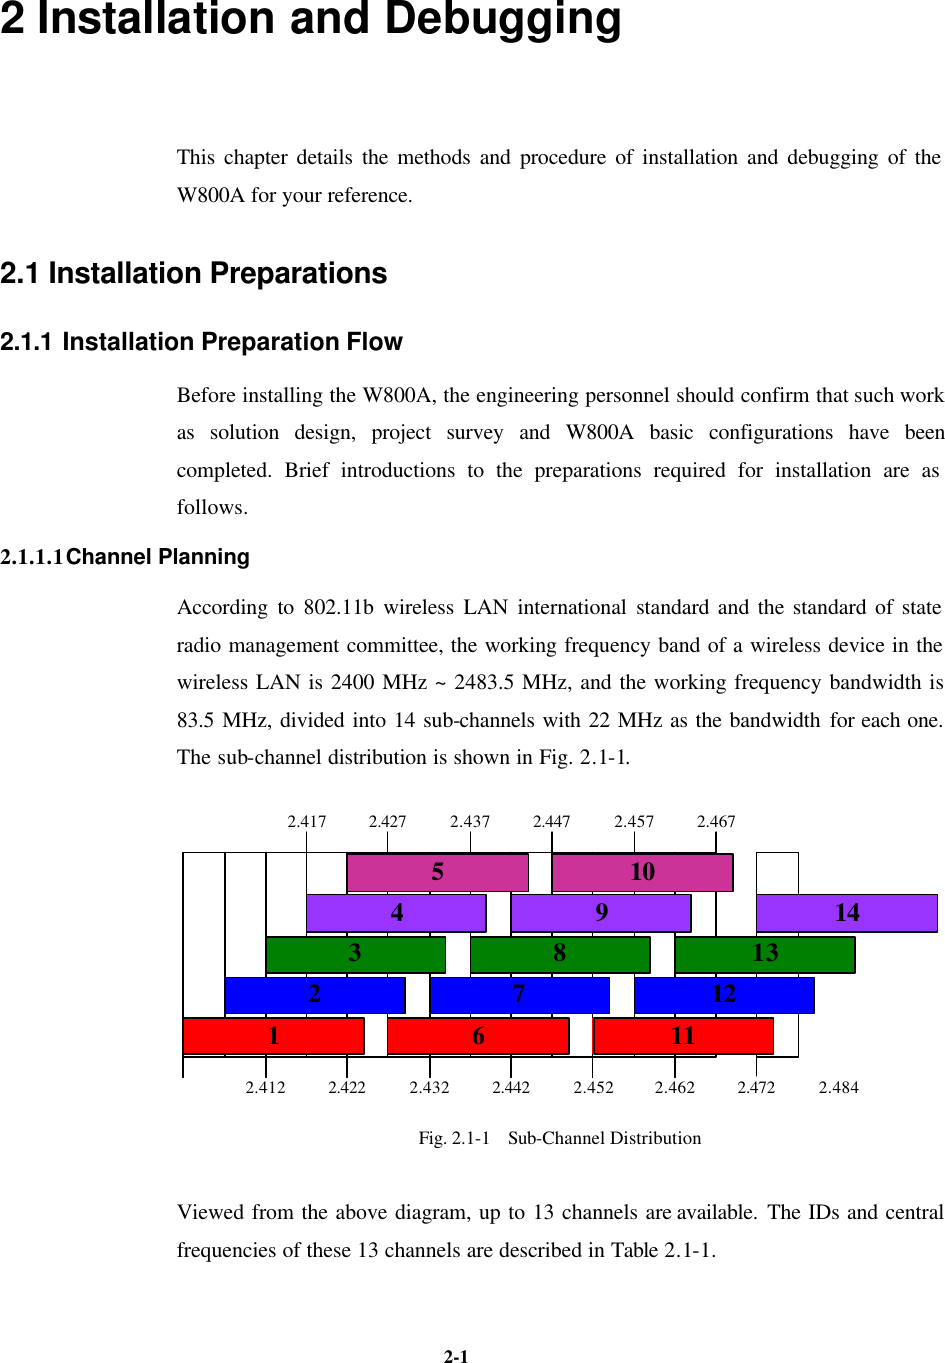   2-1 2 Installation and Debugging This chapter details the methods and procedure of installation and debugging of the W800A for your reference.   2.1 Installation Preparations 2.1.1 Installation Preparation Flow Before installing the W800A, the engineering personnel should confirm that such work as solution design, project survey and W800A basic configurations have been completed. Brief introductions to the preparations required for installation are as follows. 2.1.1.1 Channel Planning According to 802.11b wireless LAN international standard and the standard of state radio management committee, the working frequency band of a wireless device in the wireless LAN is 2400 MHz ~ 2483.5 MHz, and the working frequency bandwidth is 83.5 MHz, divided into 14 sub-channels with 22 MHz as the bandwidth for each one. The sub-channel distribution is shown in Fig. 2.1-1. 1 6 112 7 12345 109814132.417 2.427 2.437 2.447 2.4572.412 2.422 2.432 2.442 2.452 2.462 2.472 2.4842.467 Fig. 2.1-1  Sub-Channel Distribution Viewed from the above diagram, up to 13 channels are available. The IDs and central frequencies of these 13 channels are described in Table 2.1-1. 